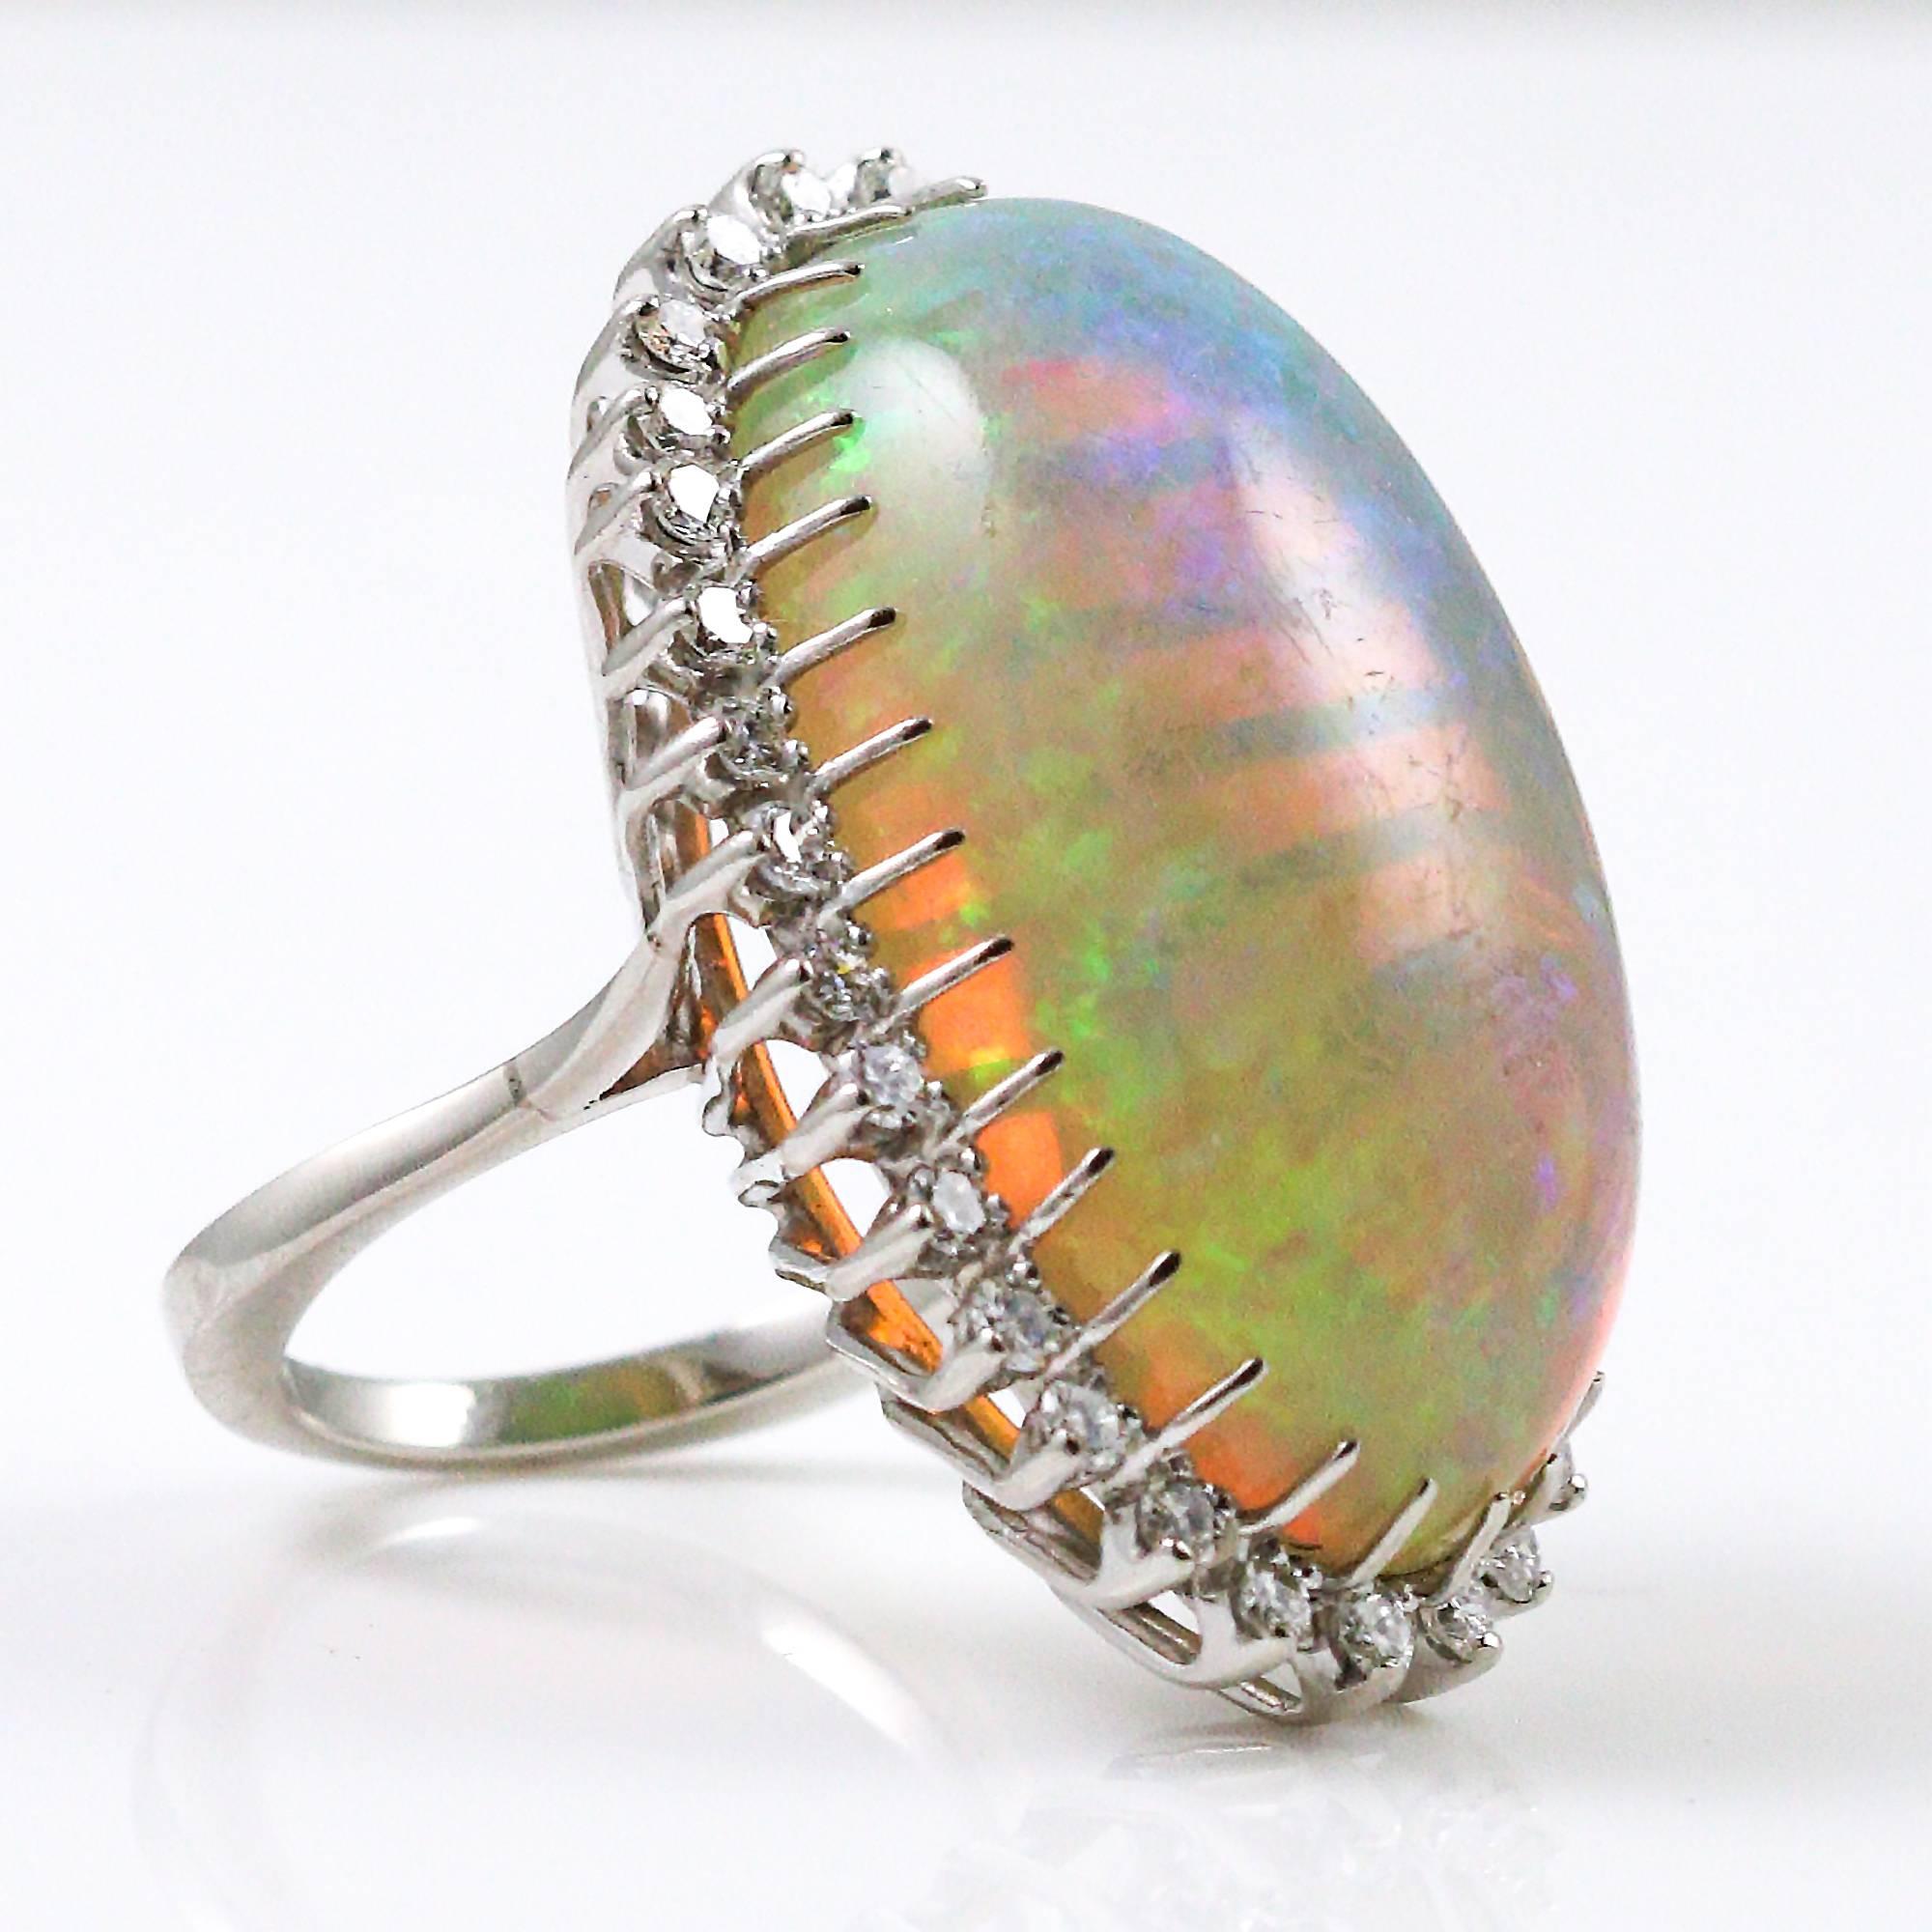 1960s-70s Modernist 47.05 Carat Cabochon Opal Ring with Diamond Halo 4